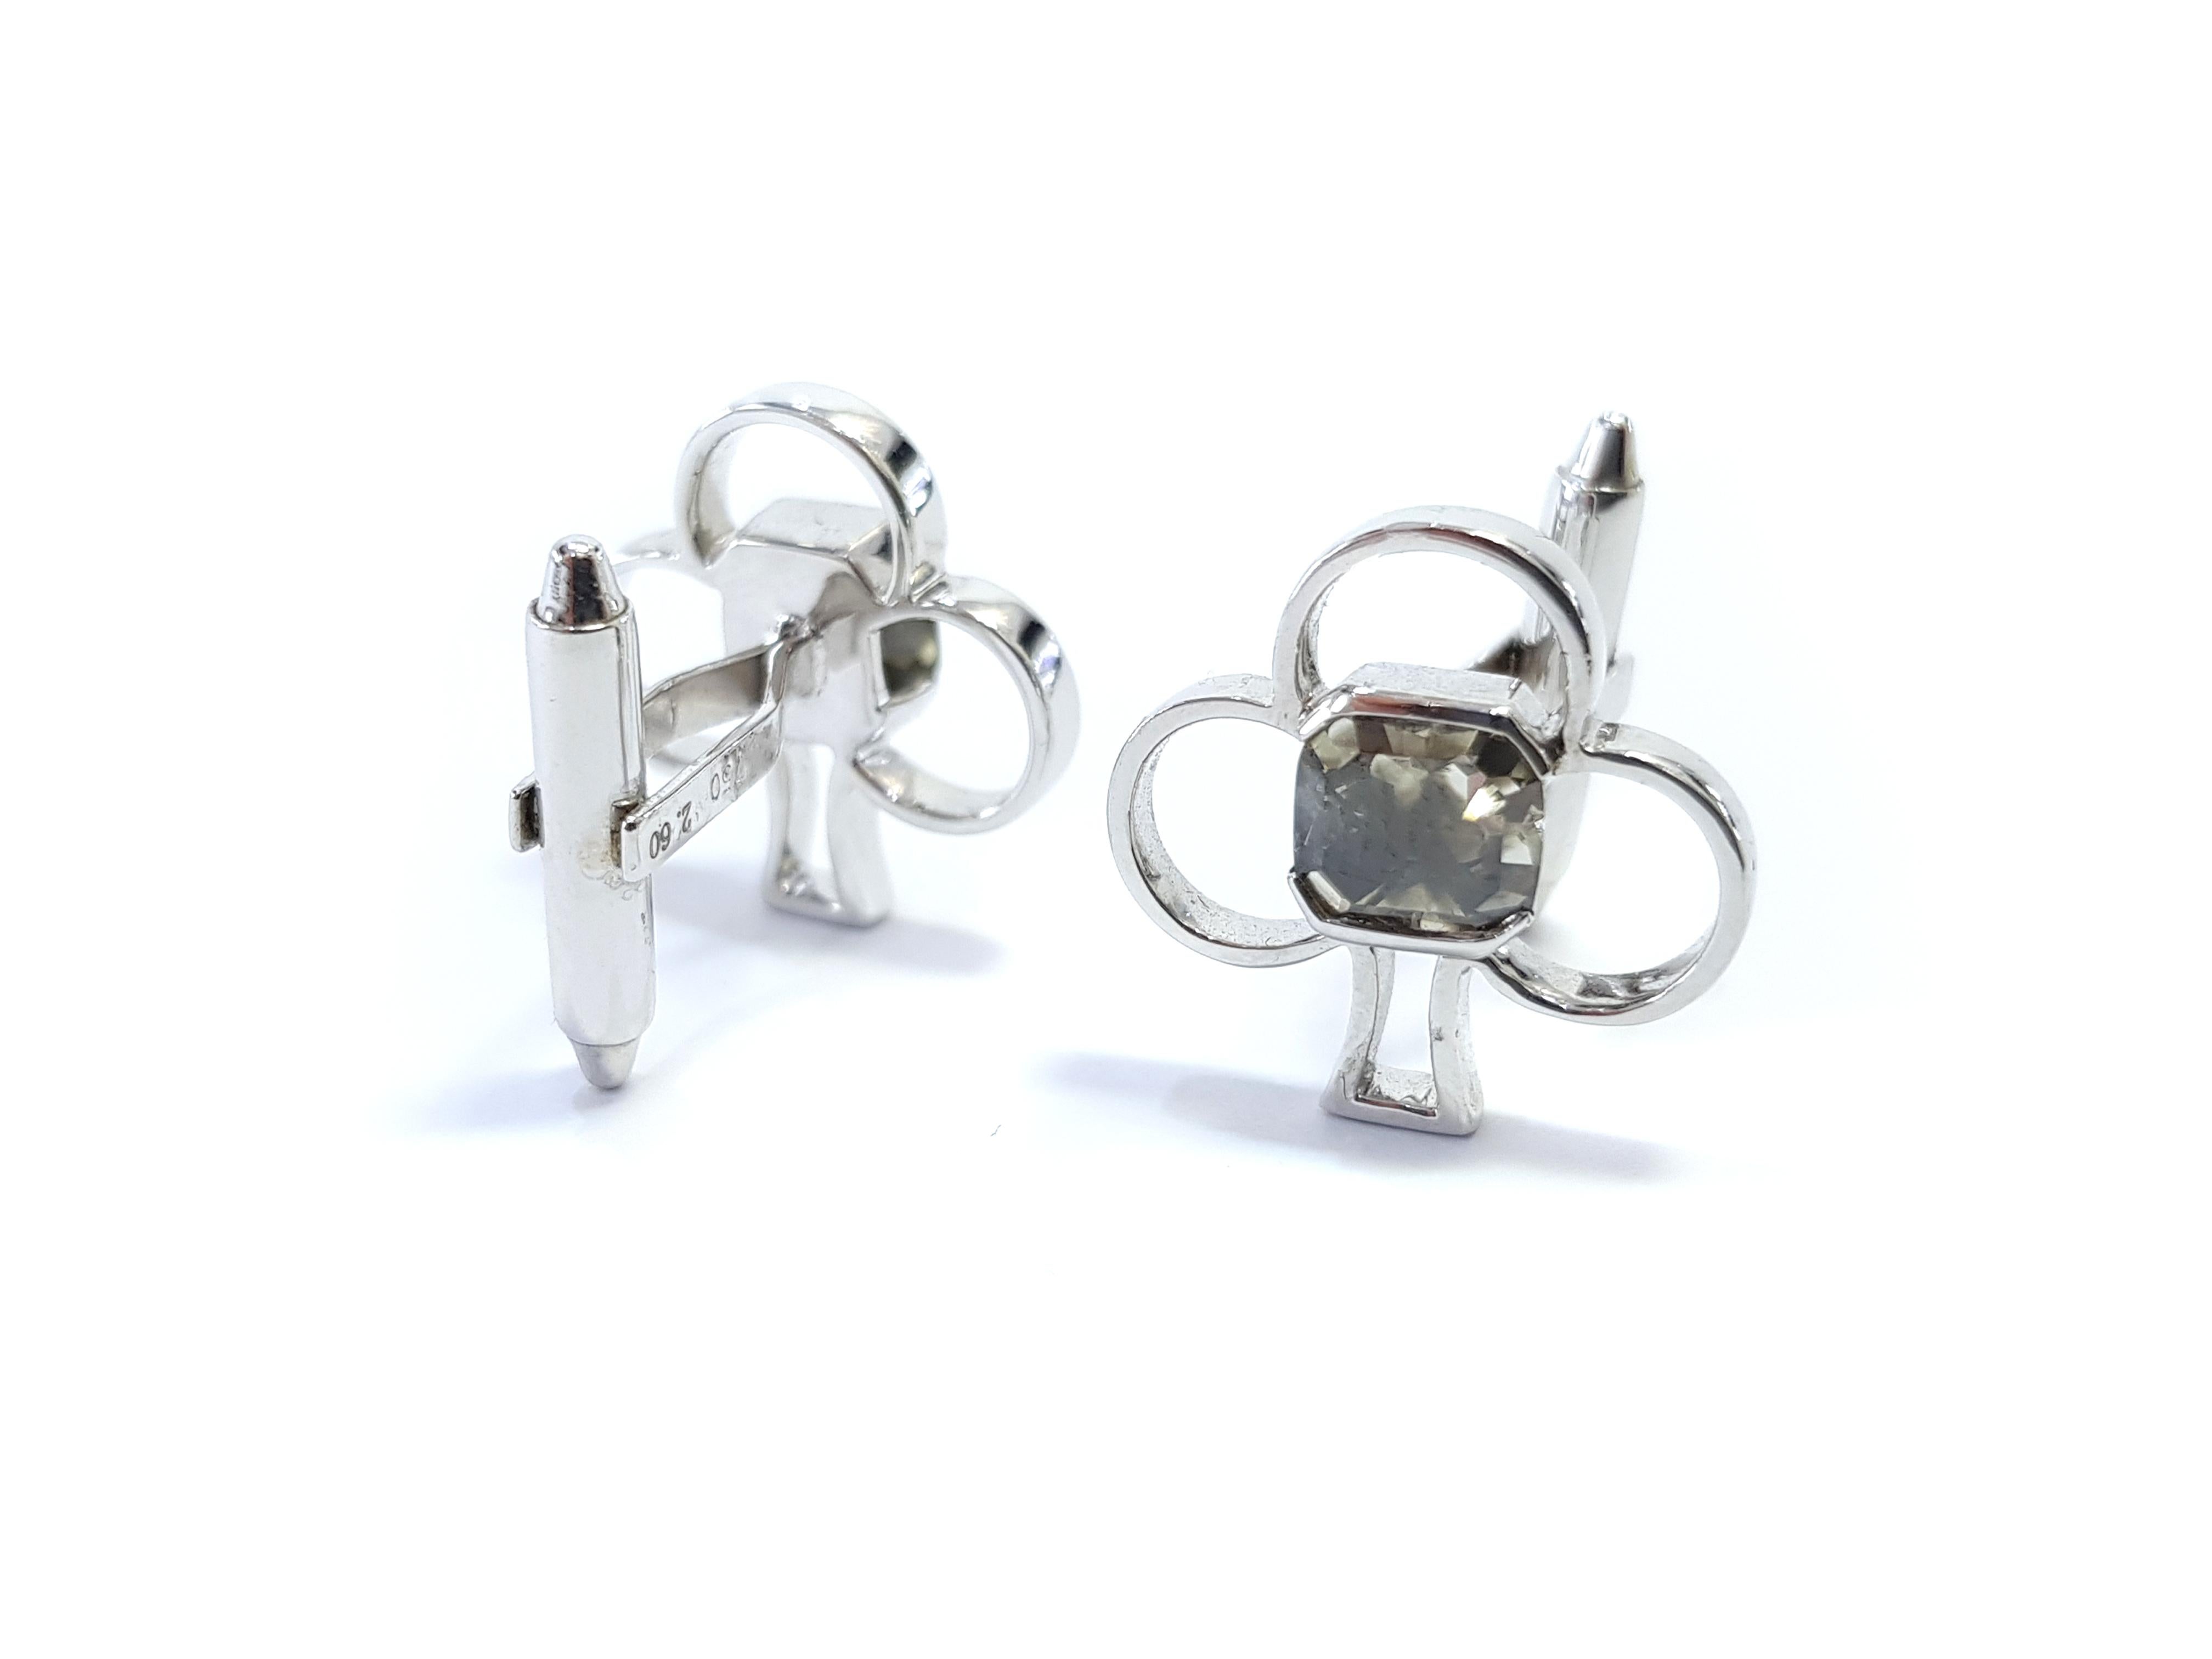 Bespoke 2.60 Carat Asscher Cut/ Modified Square Club Shape Cuff links featuring an unusual and unique Greenish Grey Color and a Clarity of SI1 Diamond Set in 18 Karat White Gold. These striking cufflinks will add style and elegance to any wardrobe,